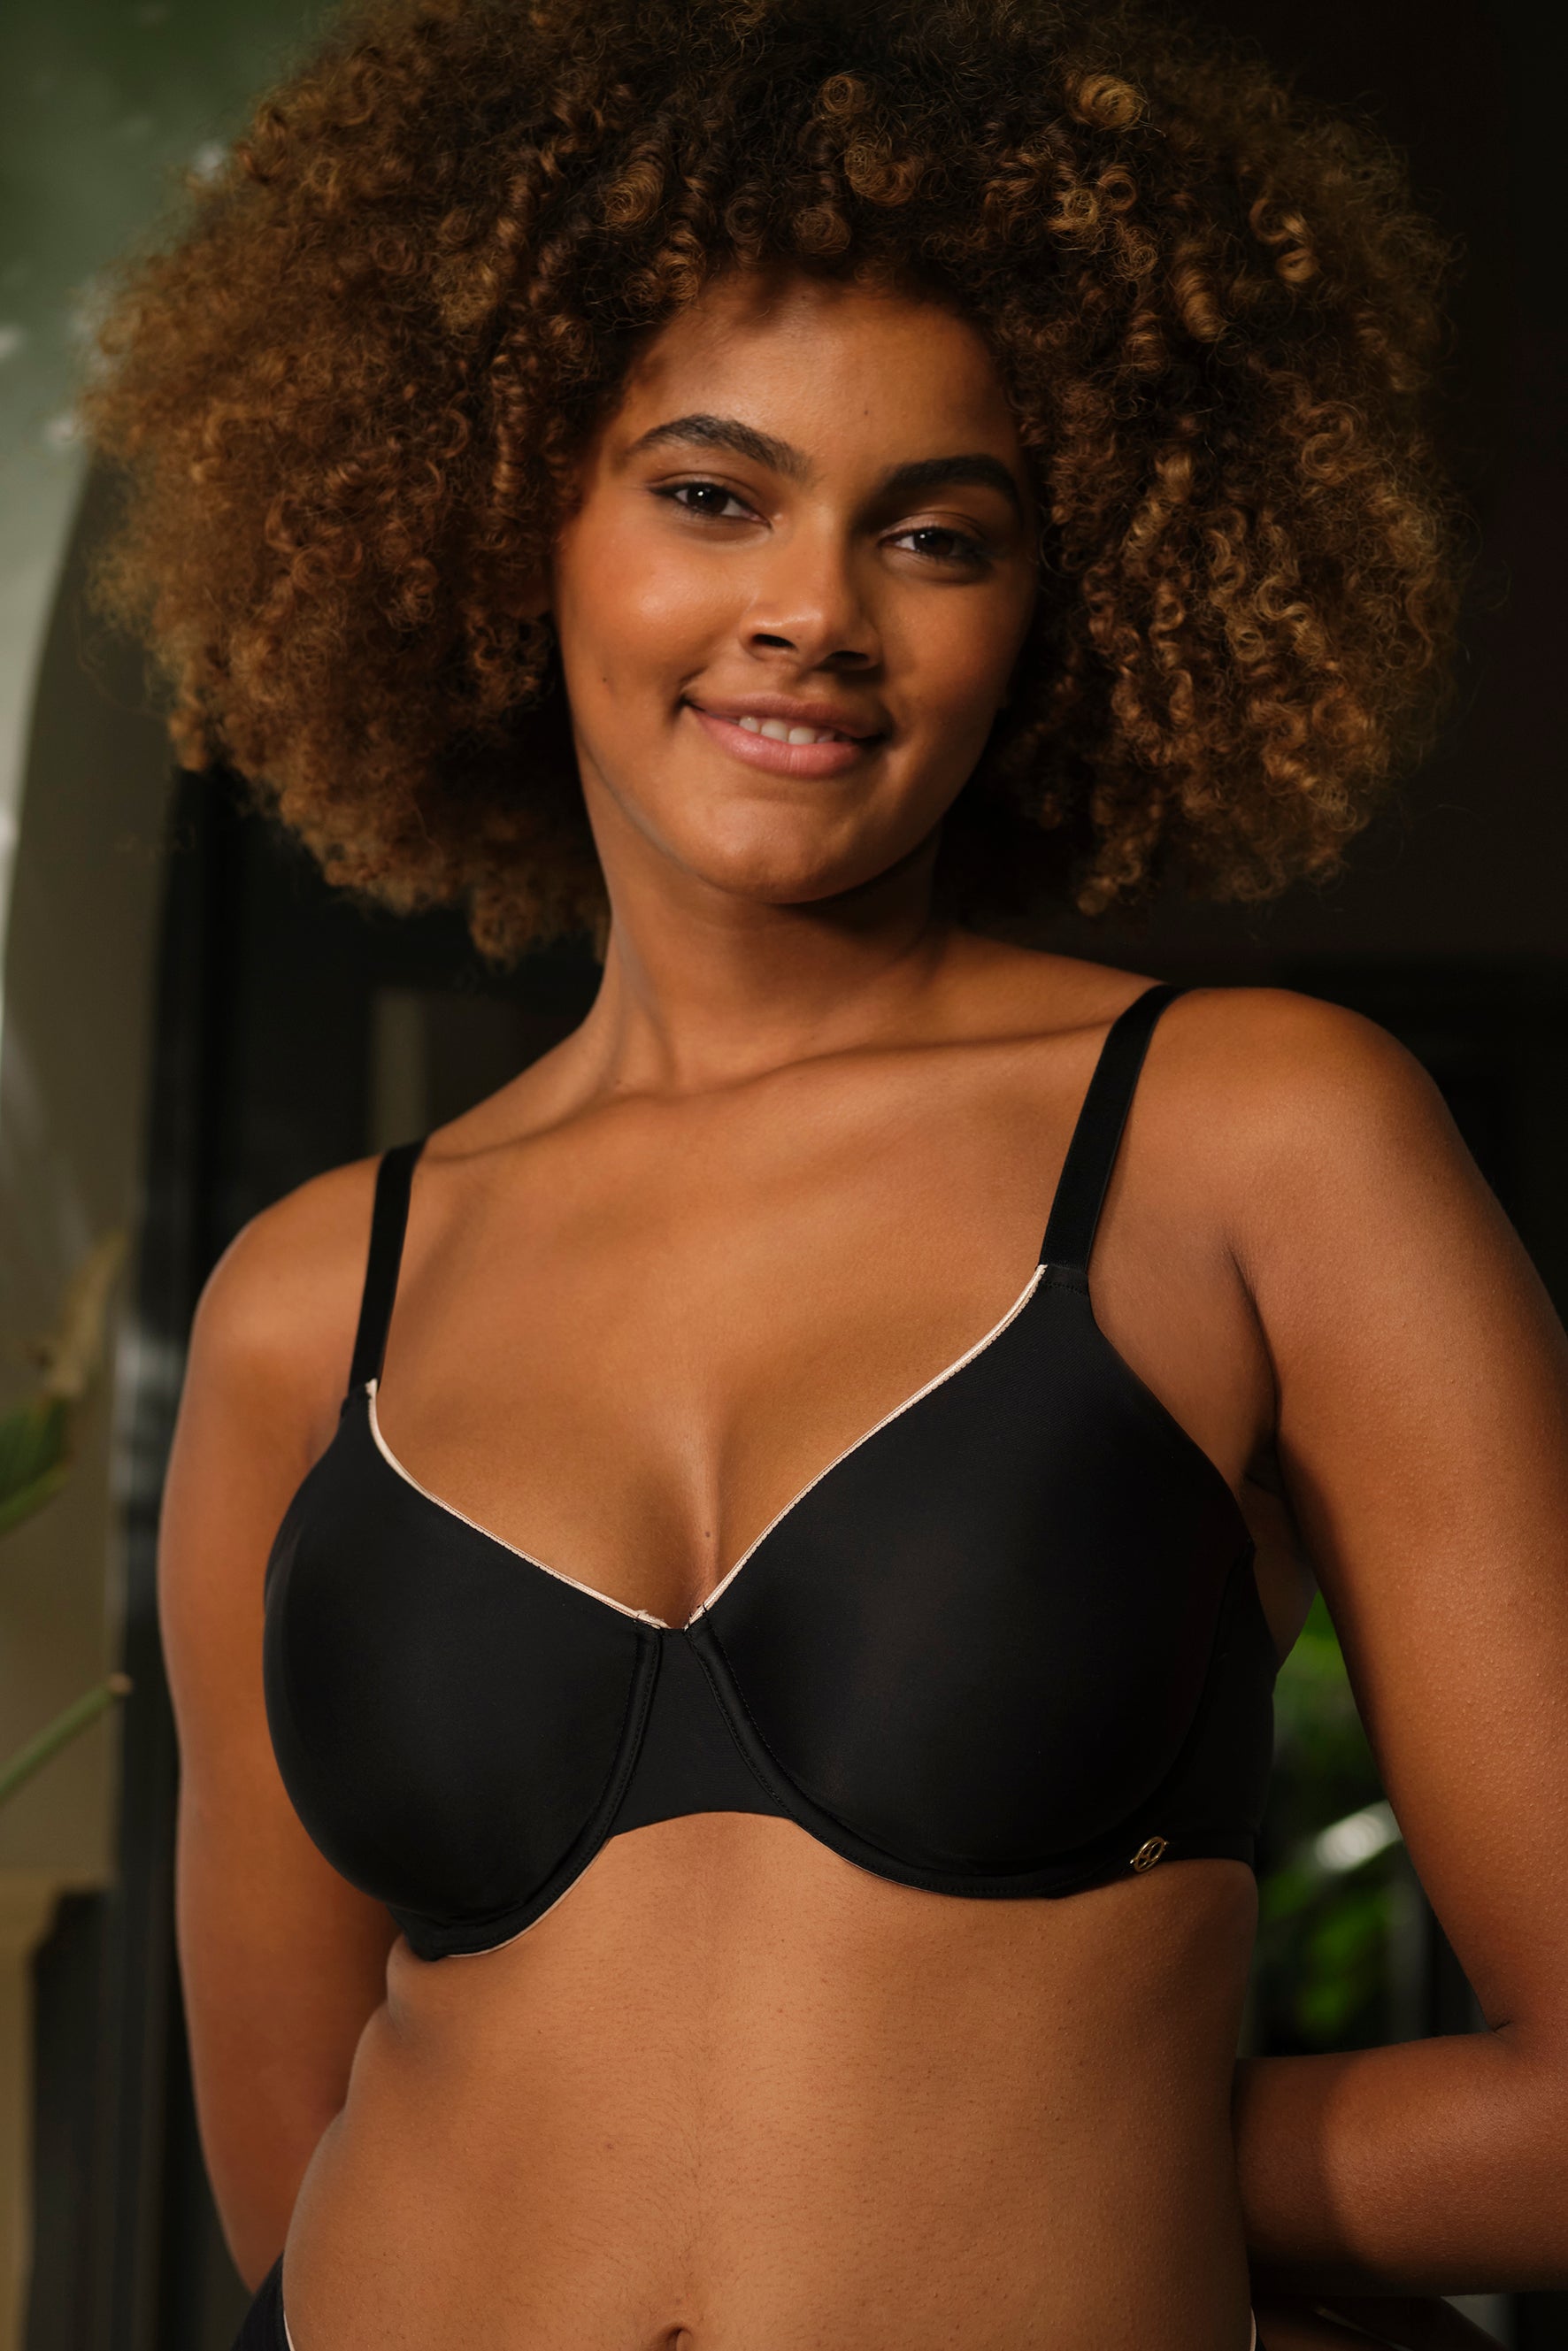 Generic Seamless Underwear Small Breasts Gather Together Show Big Breasts  Sag-Proof Suspenders Bras Without Steel Rings Expand Bras.